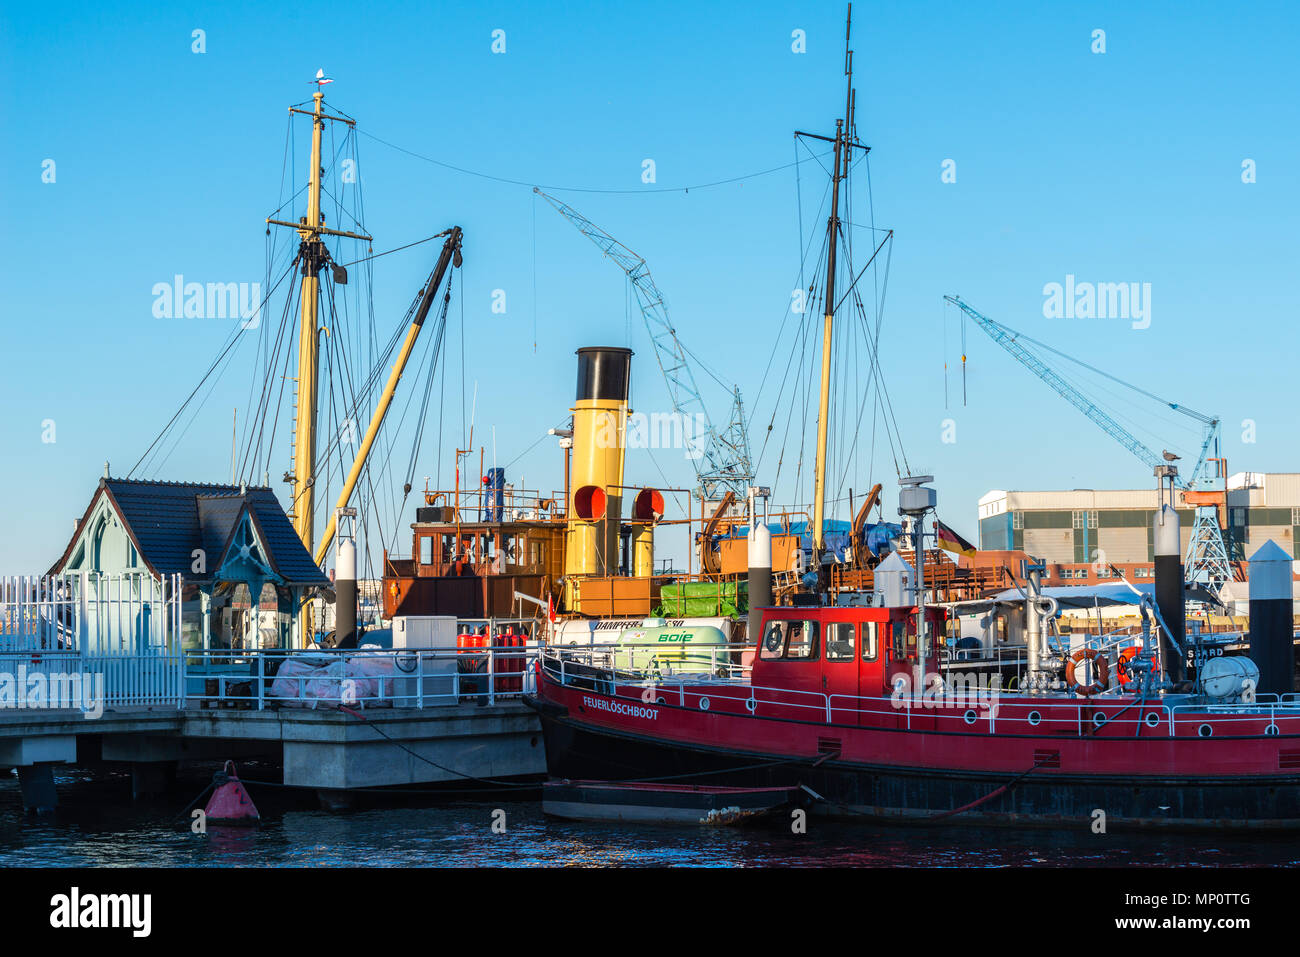 Vintage ships, a fire boat and a tow-boat,  at the pier of the 'Museum Bridge', Museumsbrücke or Museumshafen, Kiel, Schleswig-Holstein, Germany Stock Photo